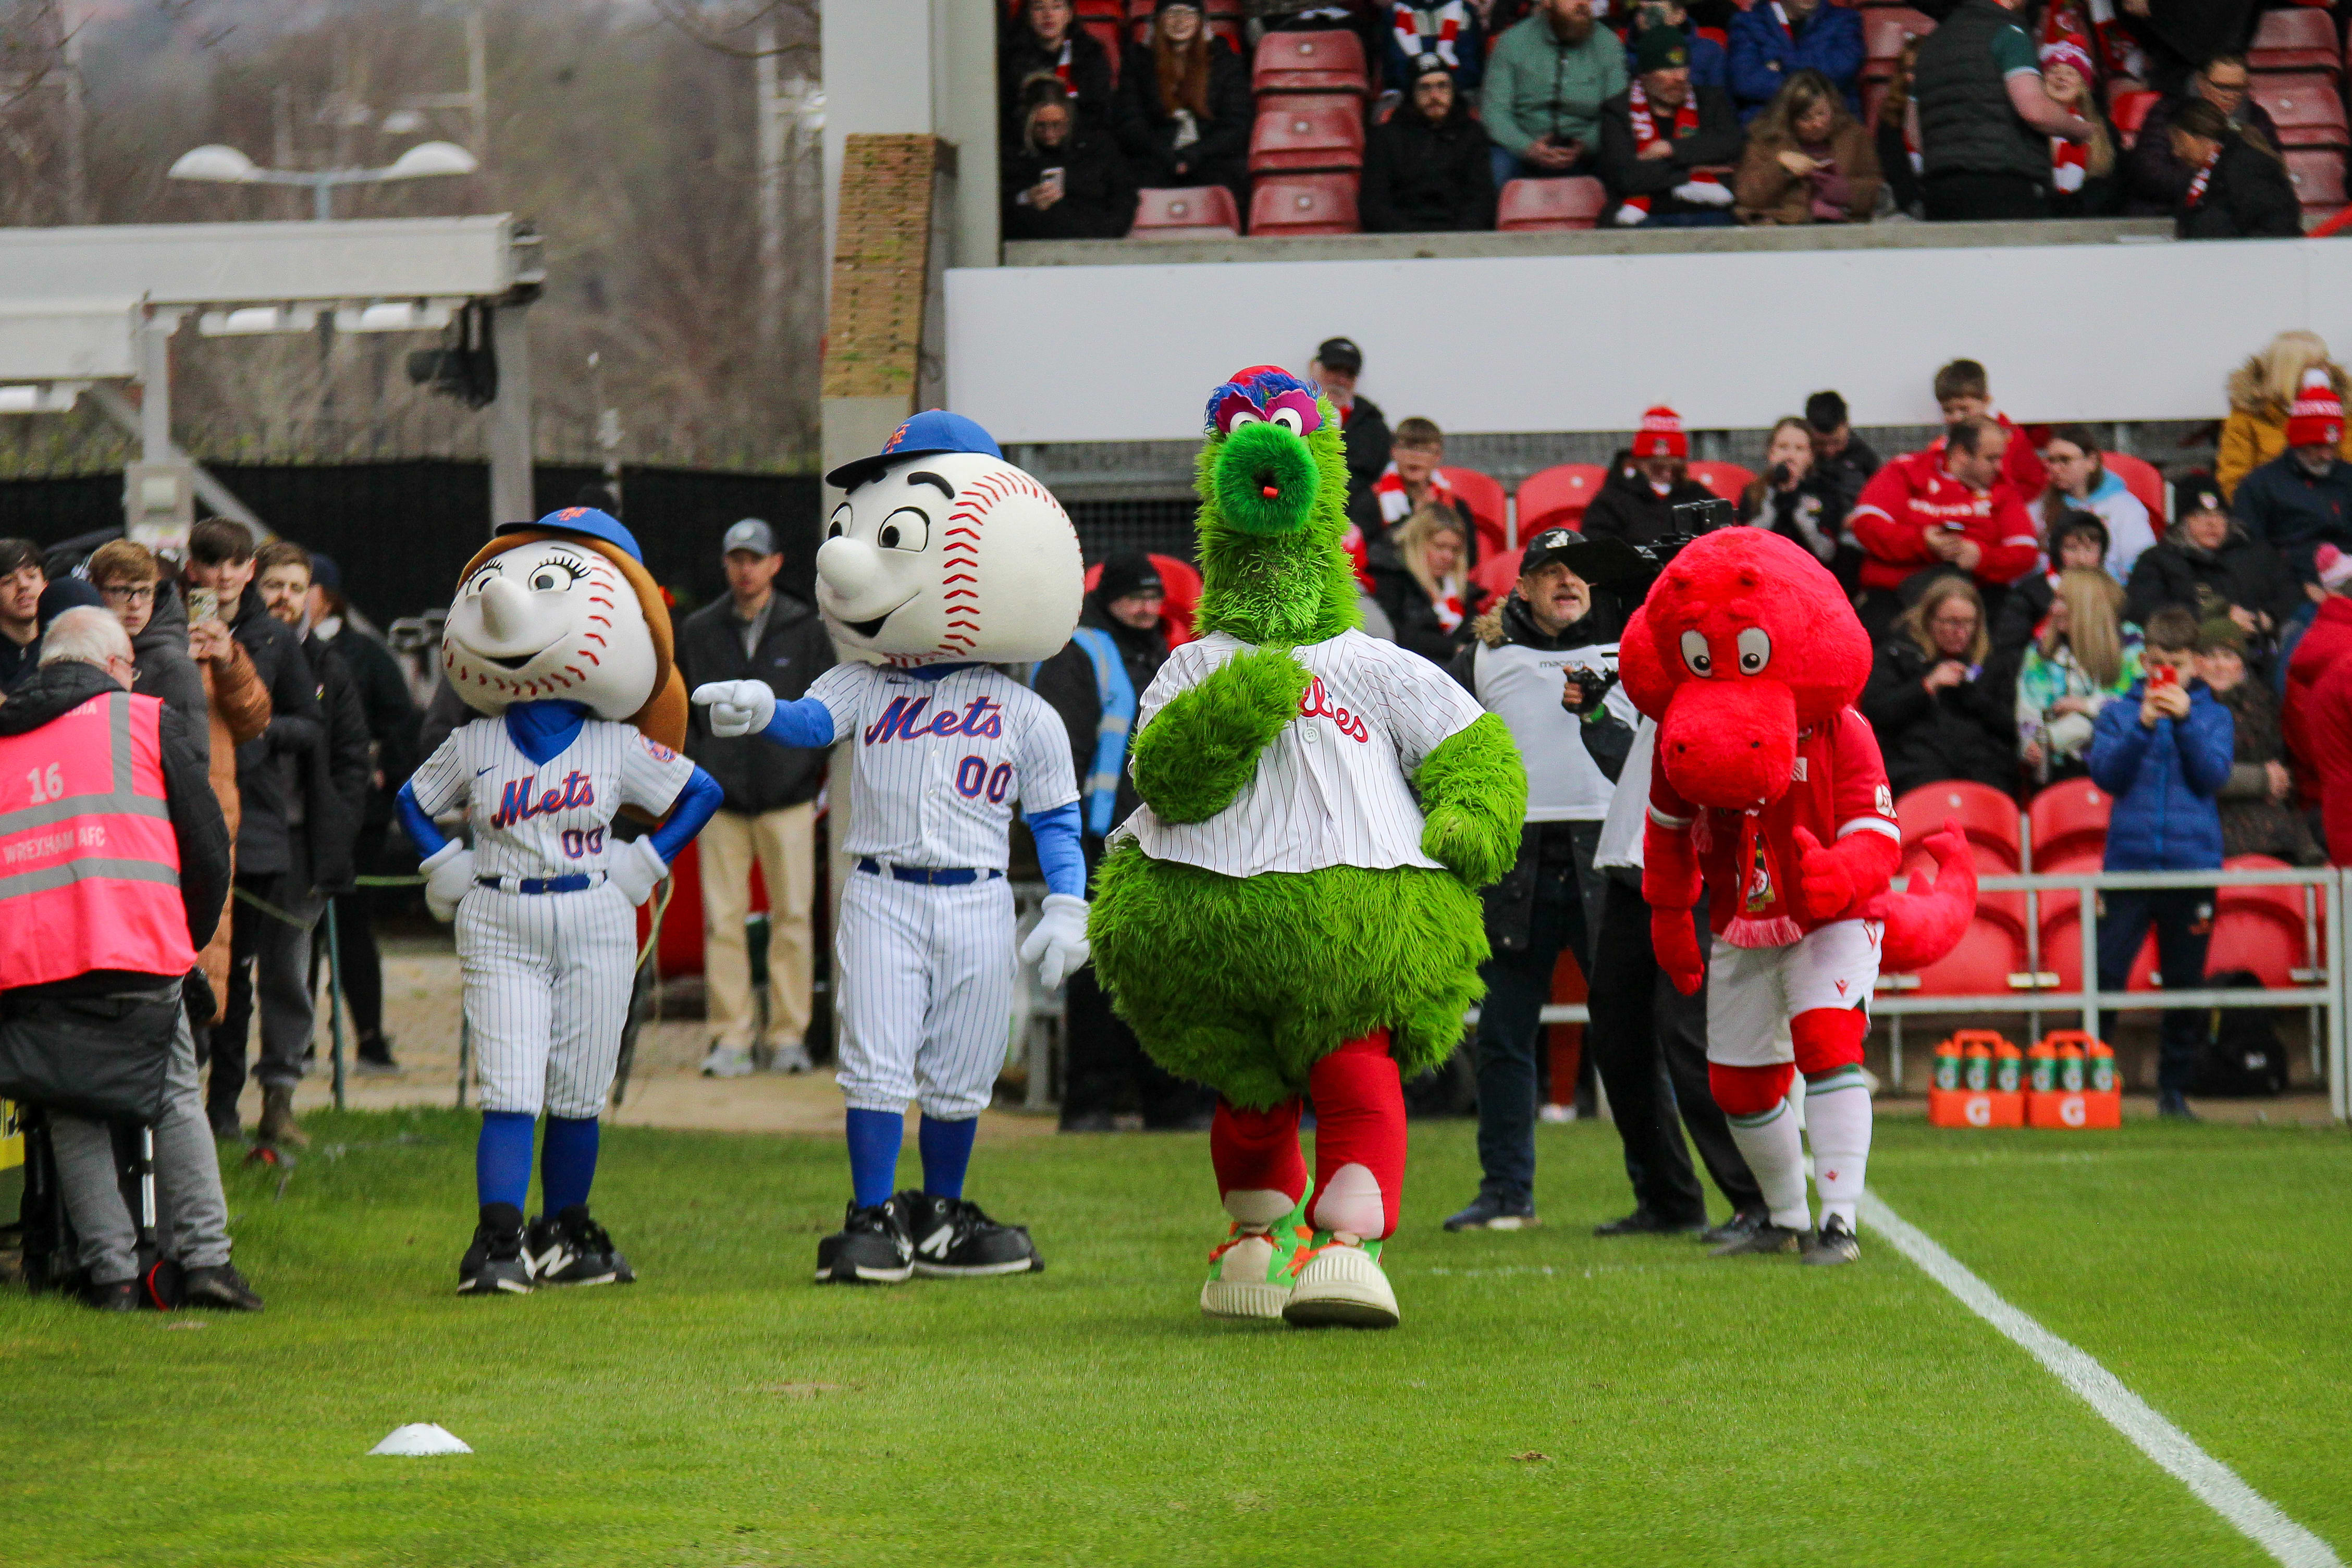 Mrs. and Mr. Met join the Phillie Phanatic in England